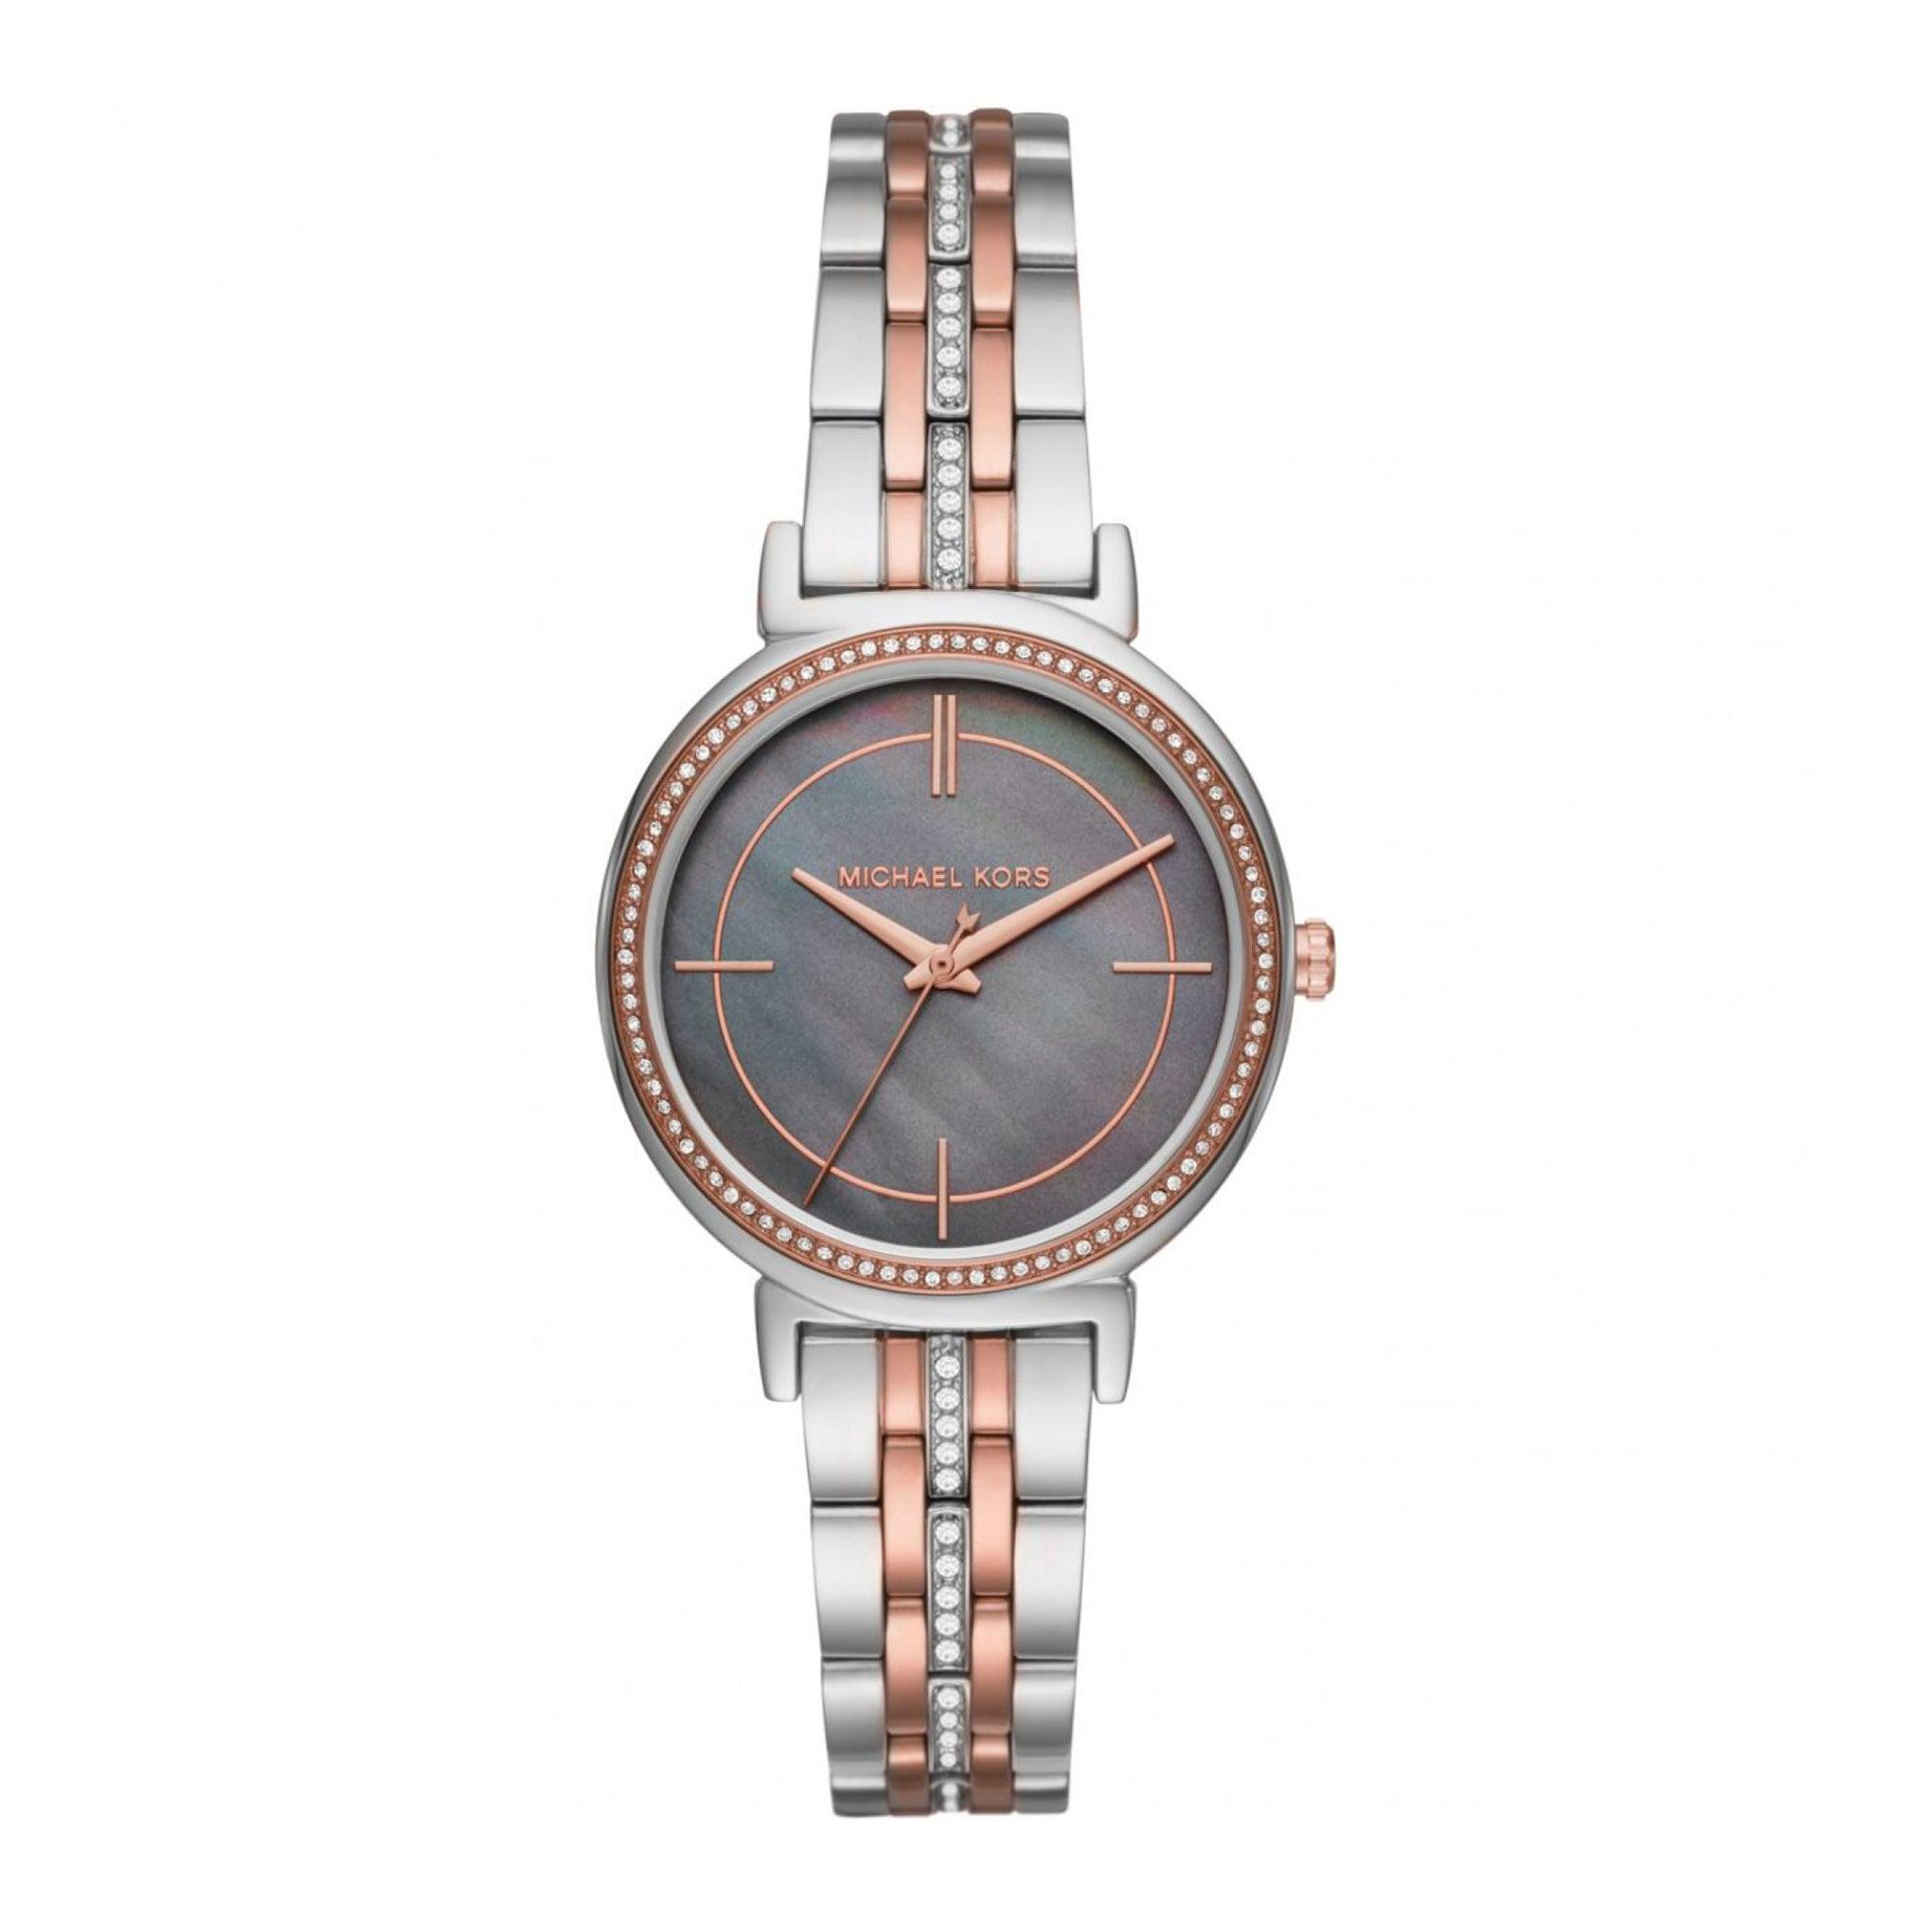 Michael Kors Women's Cinthia Grey Mother Of Pearl Dial Stainless Steel Ban Watch - Mk3642